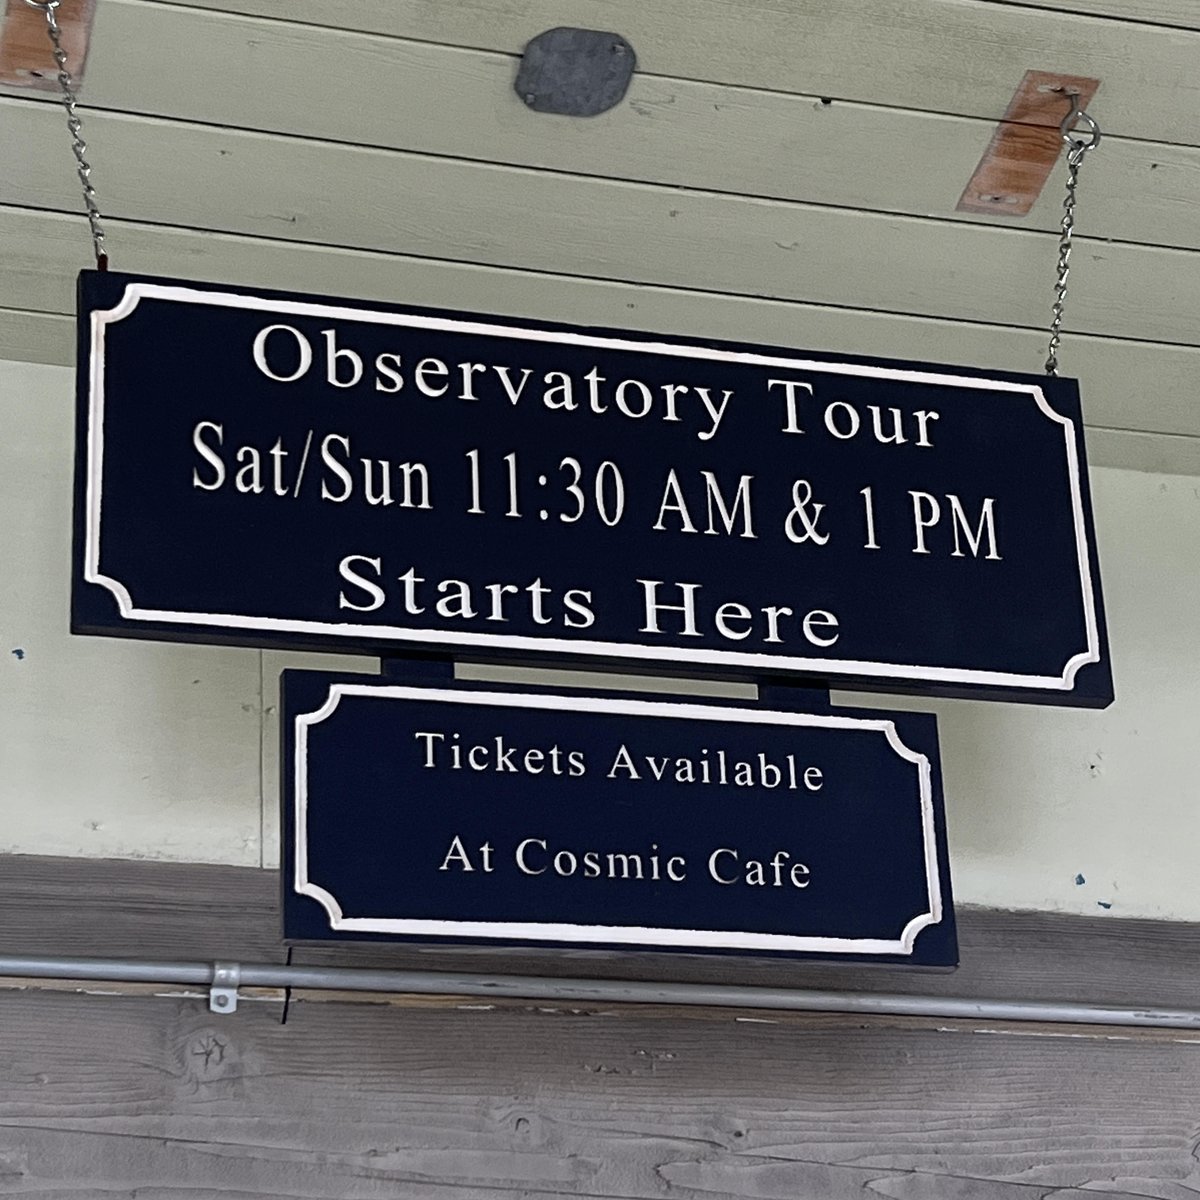 Looking for something to do this weekend? Docent-led tours of the Observatory Sat/Sun at 11:30AM & 1PM. Includes entrance into the 60 & 100' telescope domes, & the observing room of the 150' Solar Tower. We look forward to seeing you on the mountain! mtwilson.edu/weekend-docent…